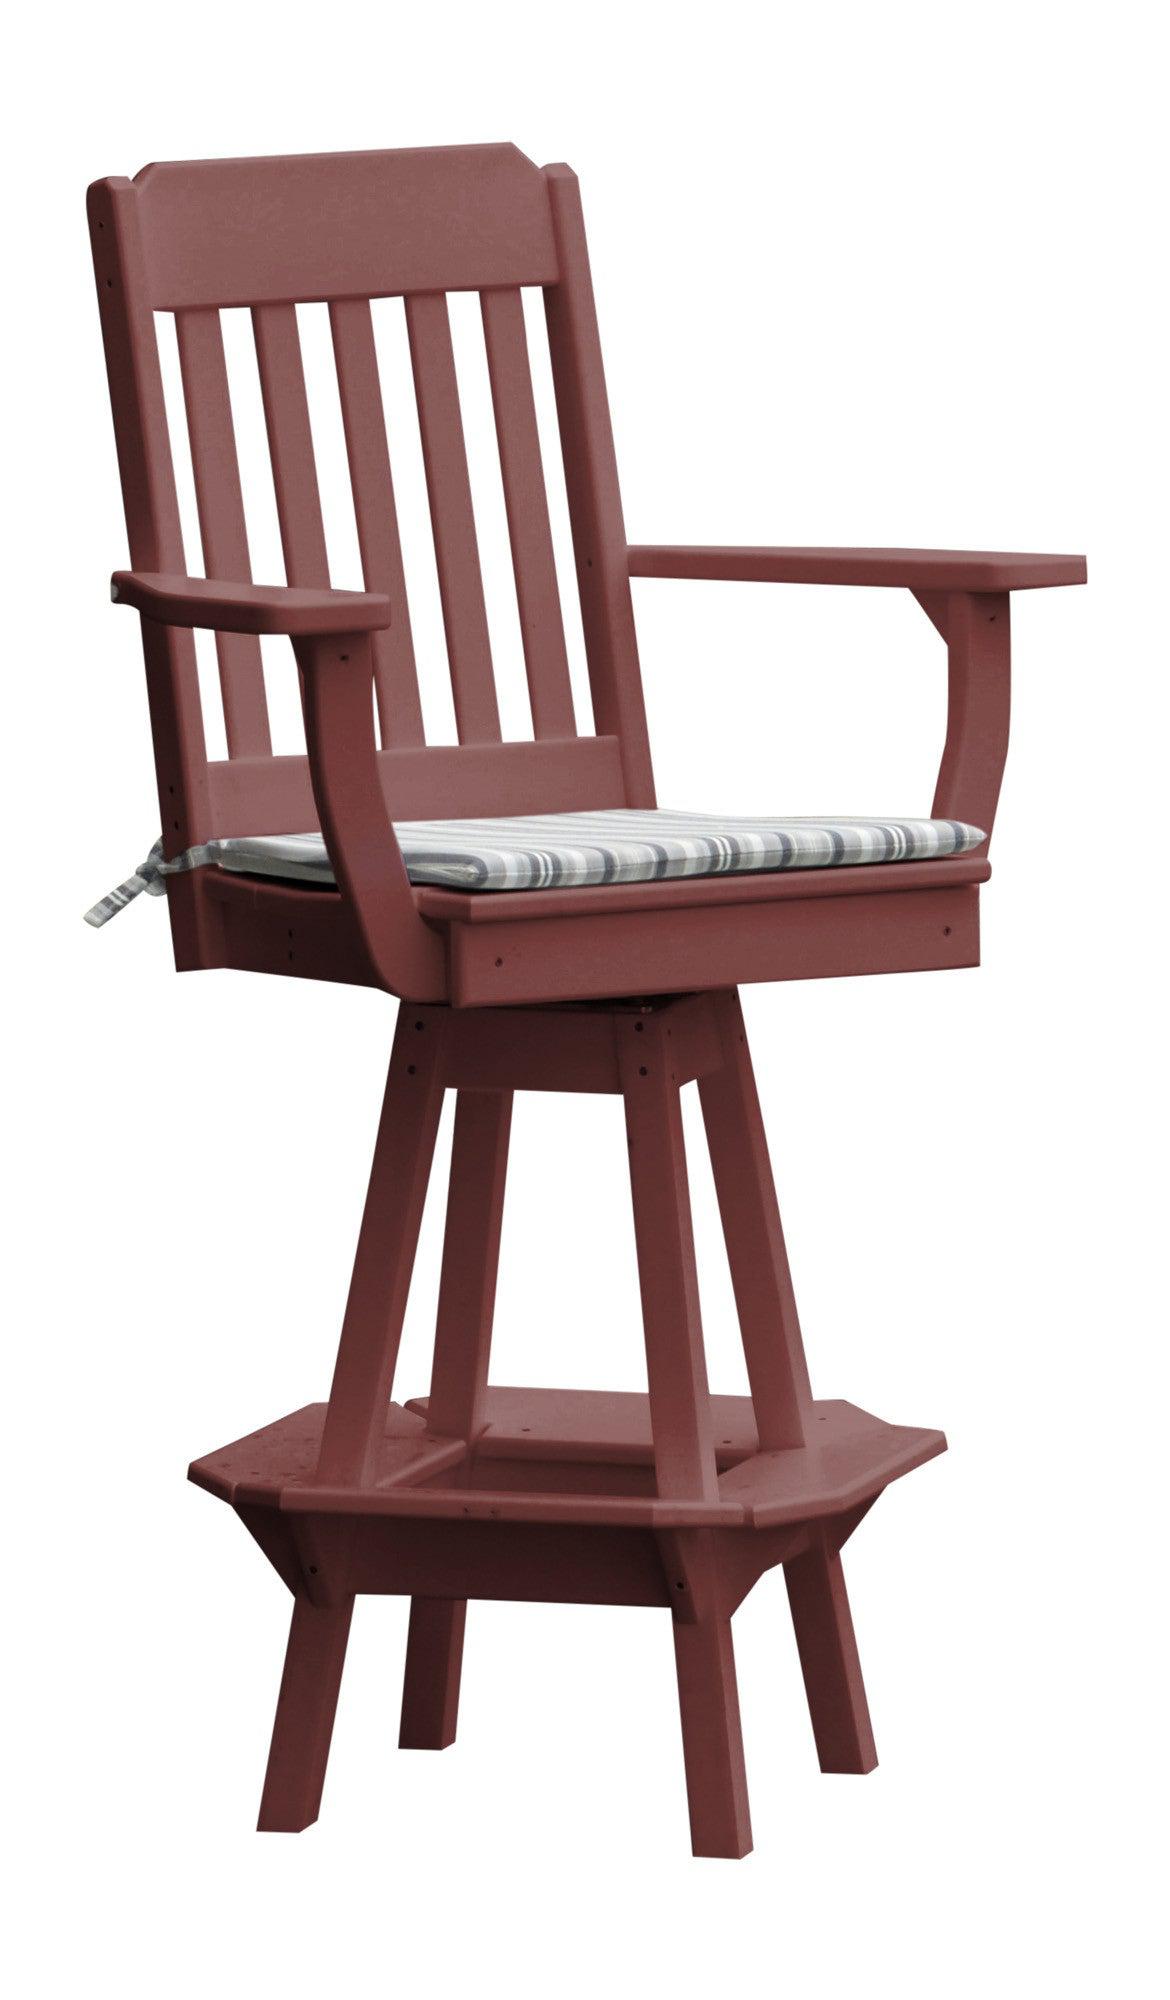 A&L Furniture Company Recycled Plastic Traditional Swivel Bar Chair w/ Arms - Cherrywood